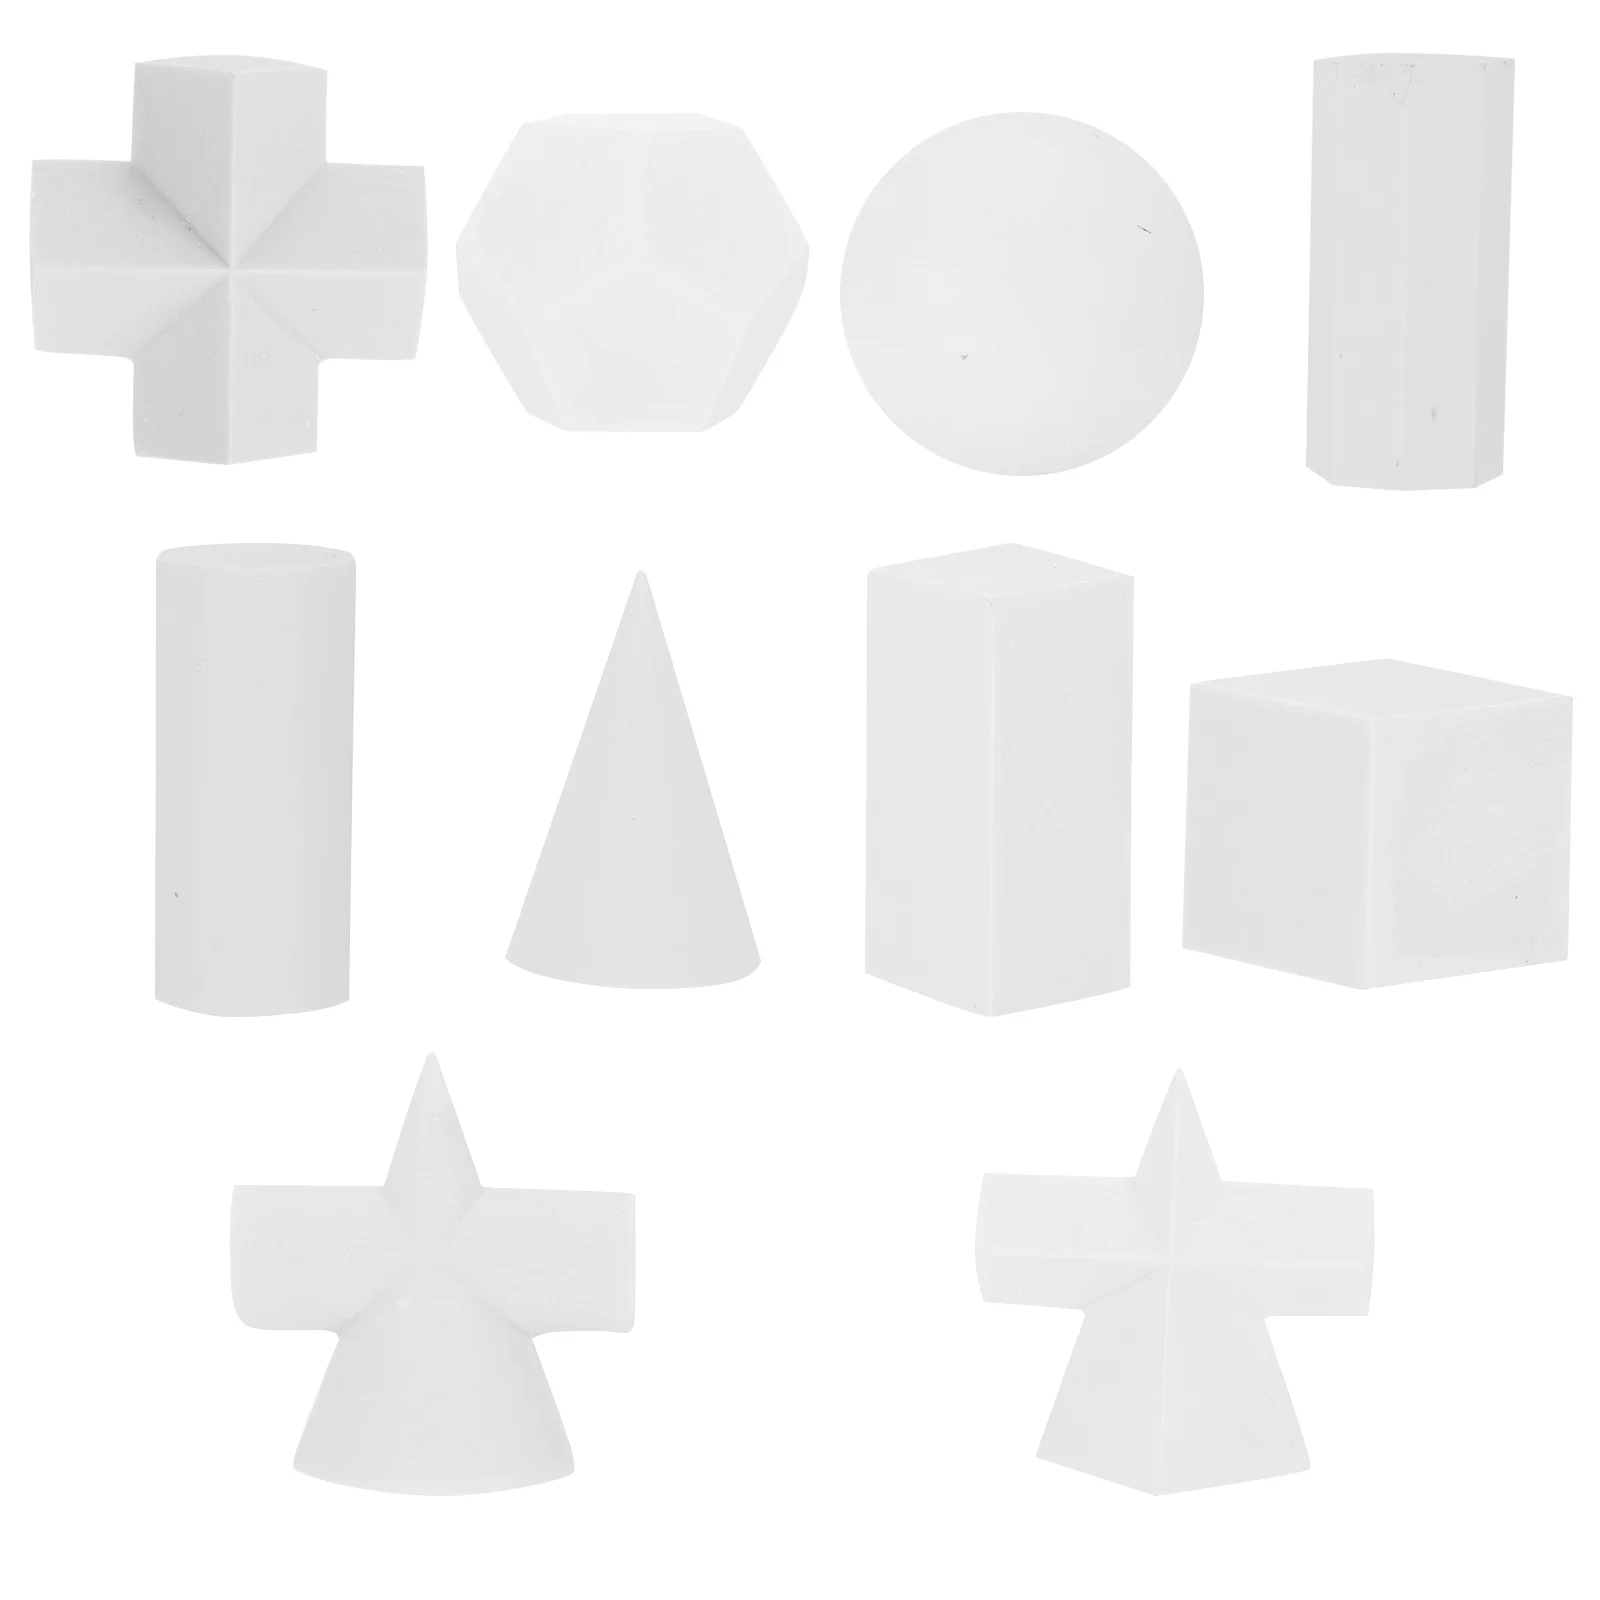 

10 Pcs Statue Decor Sketch Geometry Resin Geometrical Sculpture Mold Tool White Office